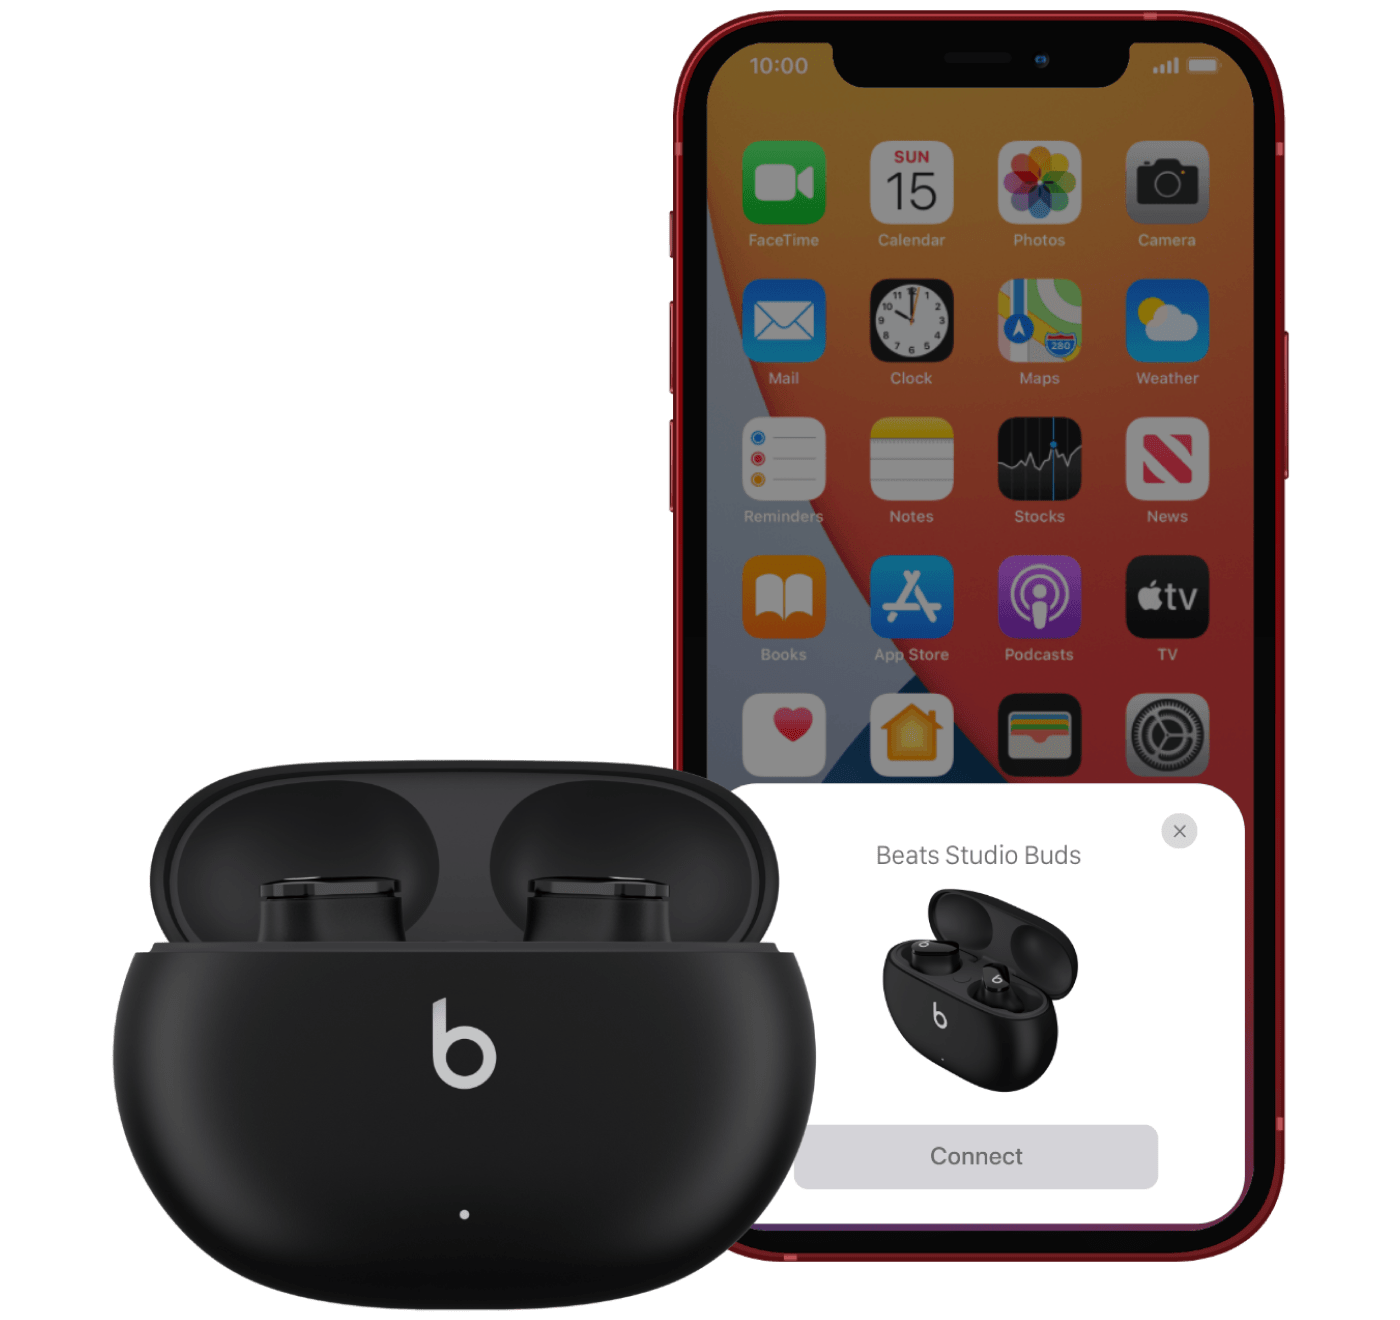 Beats Studio Buds with case next to an Android phone displaying the Beats app